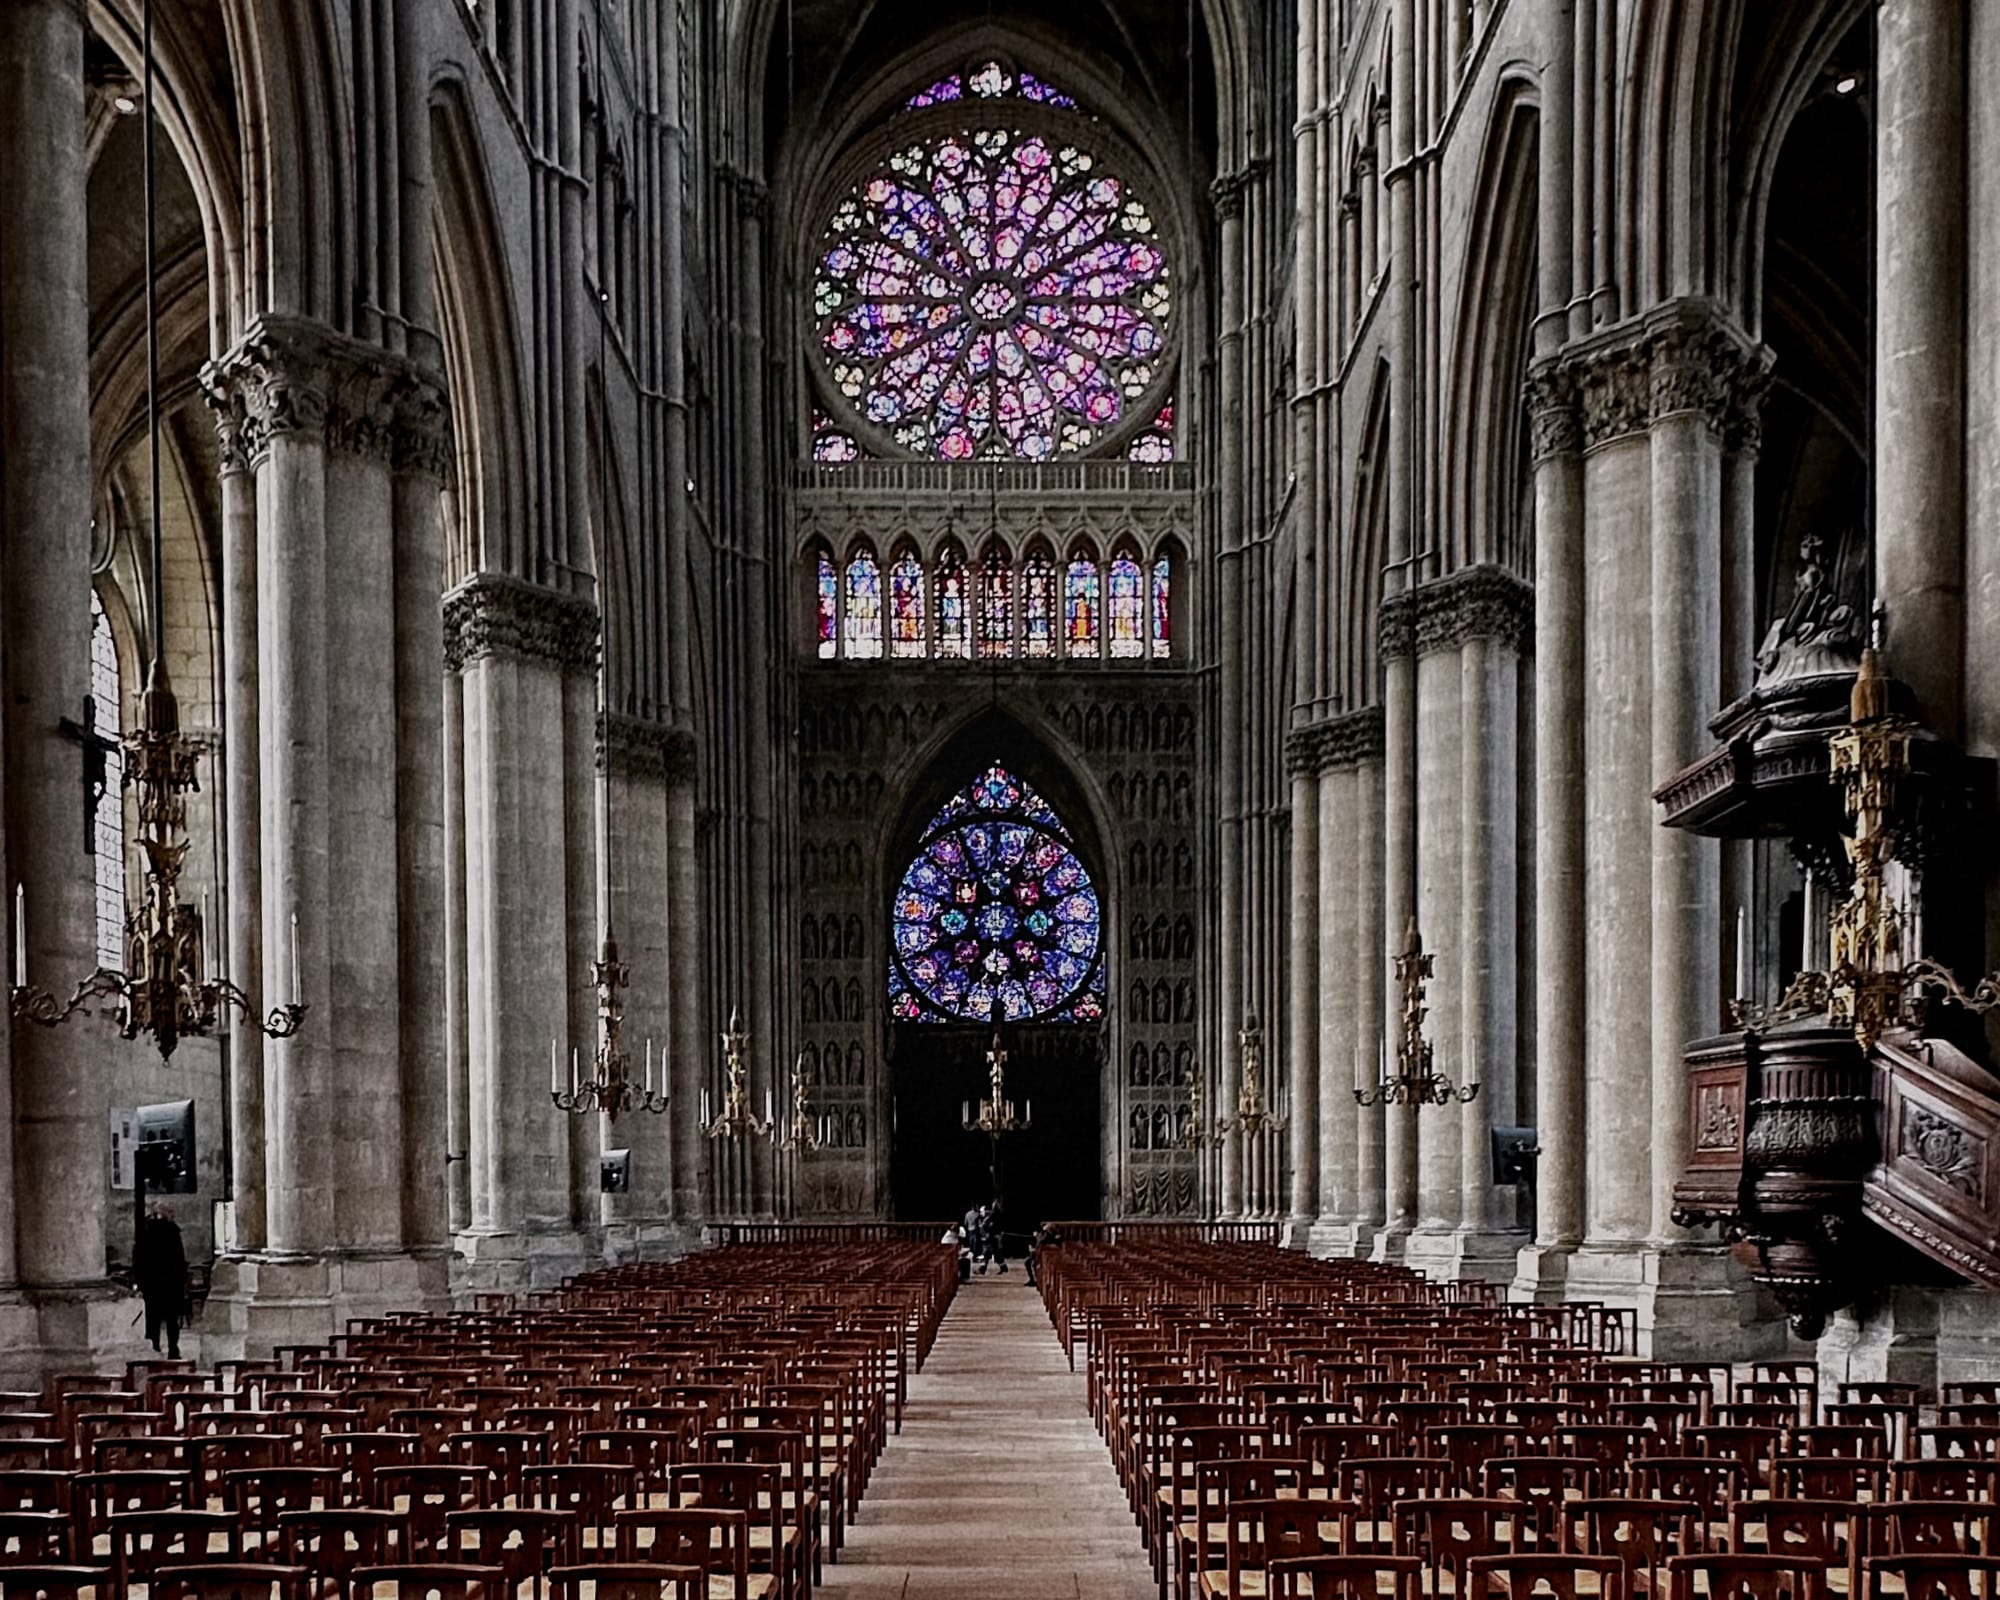 The inside of the Reims Cathedral. Large, round, stained glass windows. Stone pillars. Rows and rows of wooden chairs. 